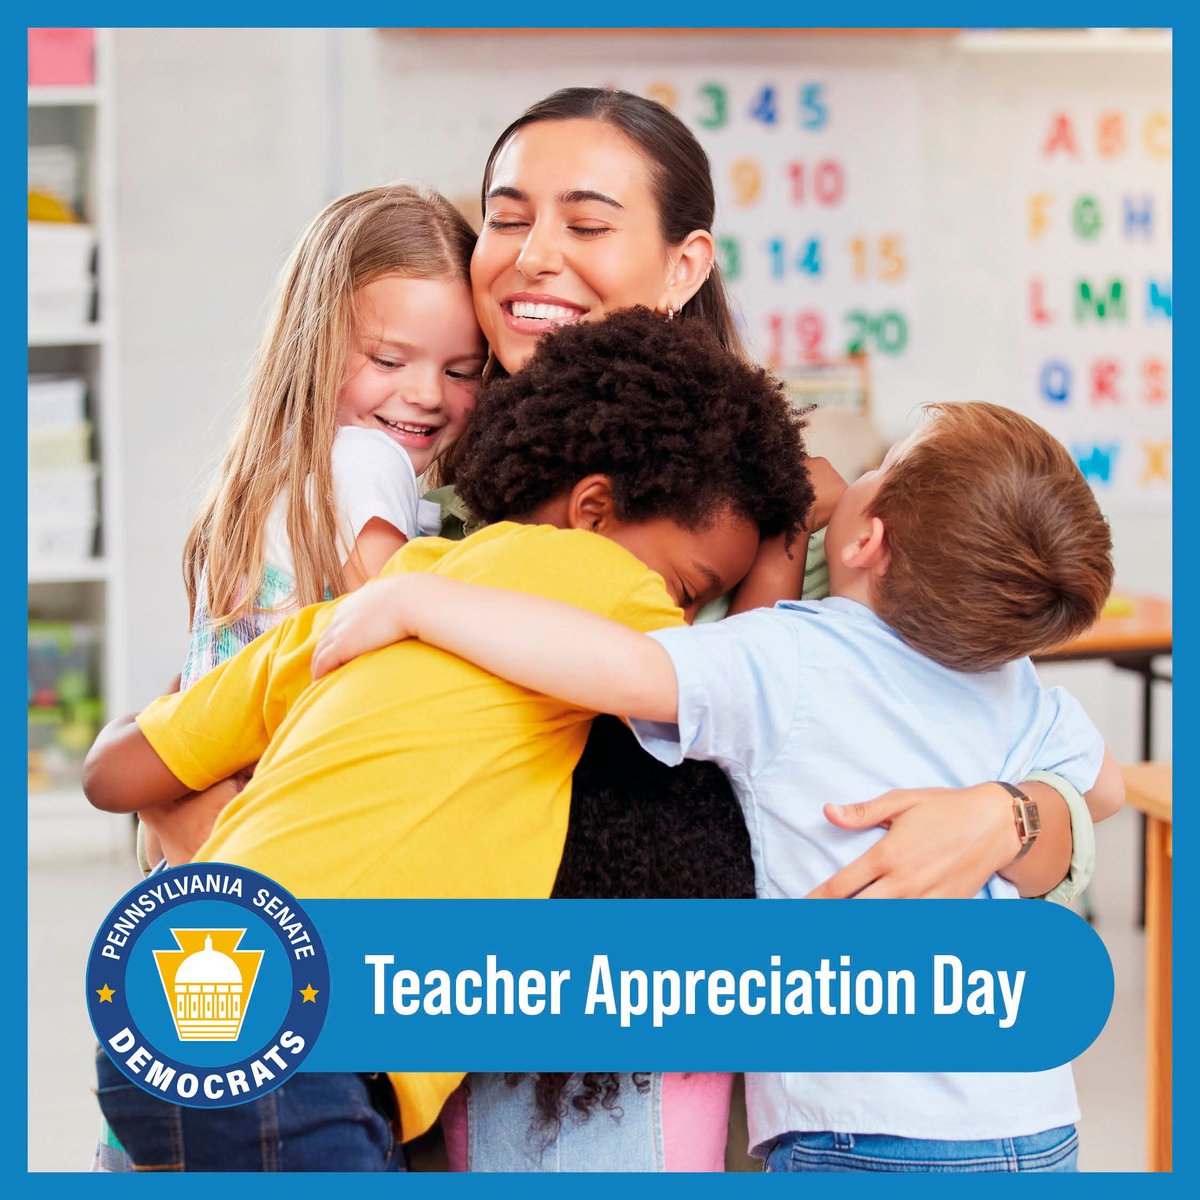 Today is National Teacher Appreciation Day, and I want to take a moment to express my gratitude to the incredible teachers who shape the future leaders of our country. 🍎 👨🏼‍🏫 #TeacherAppreciationDay #ThankATeacher